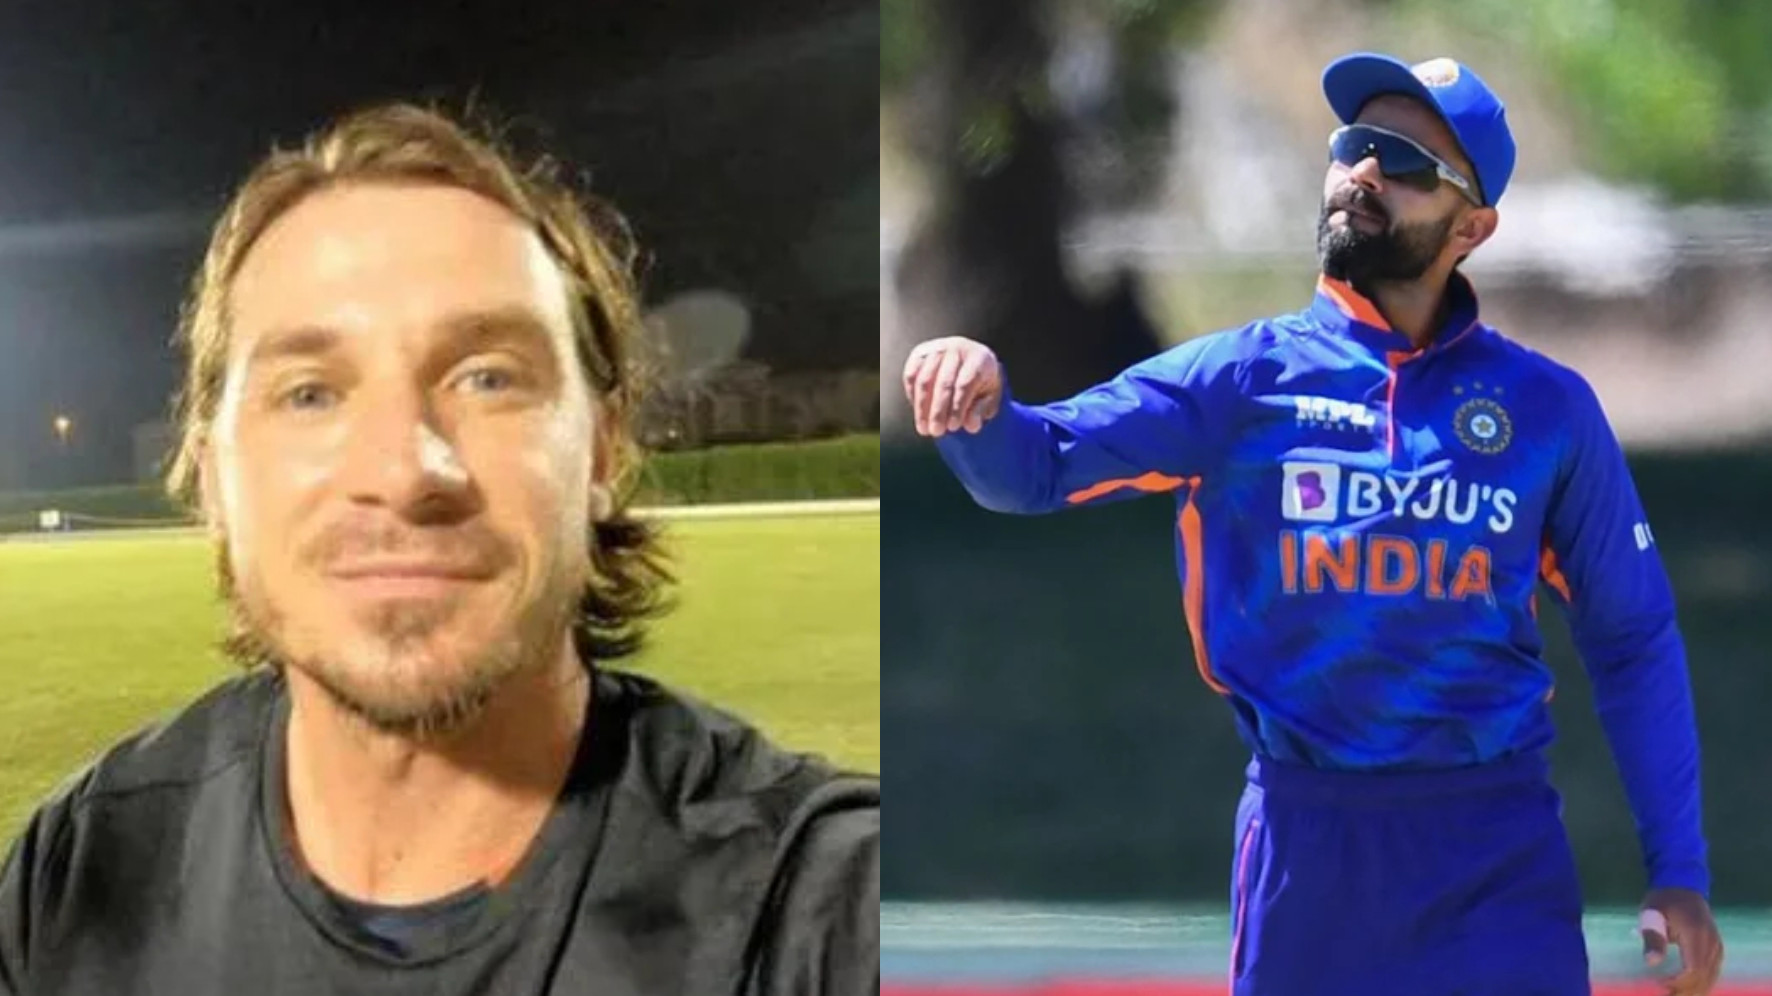 SA v IND 2021-22: You might even see a better Virat Kohli as he has quit captaincy, feels Dale Steyn